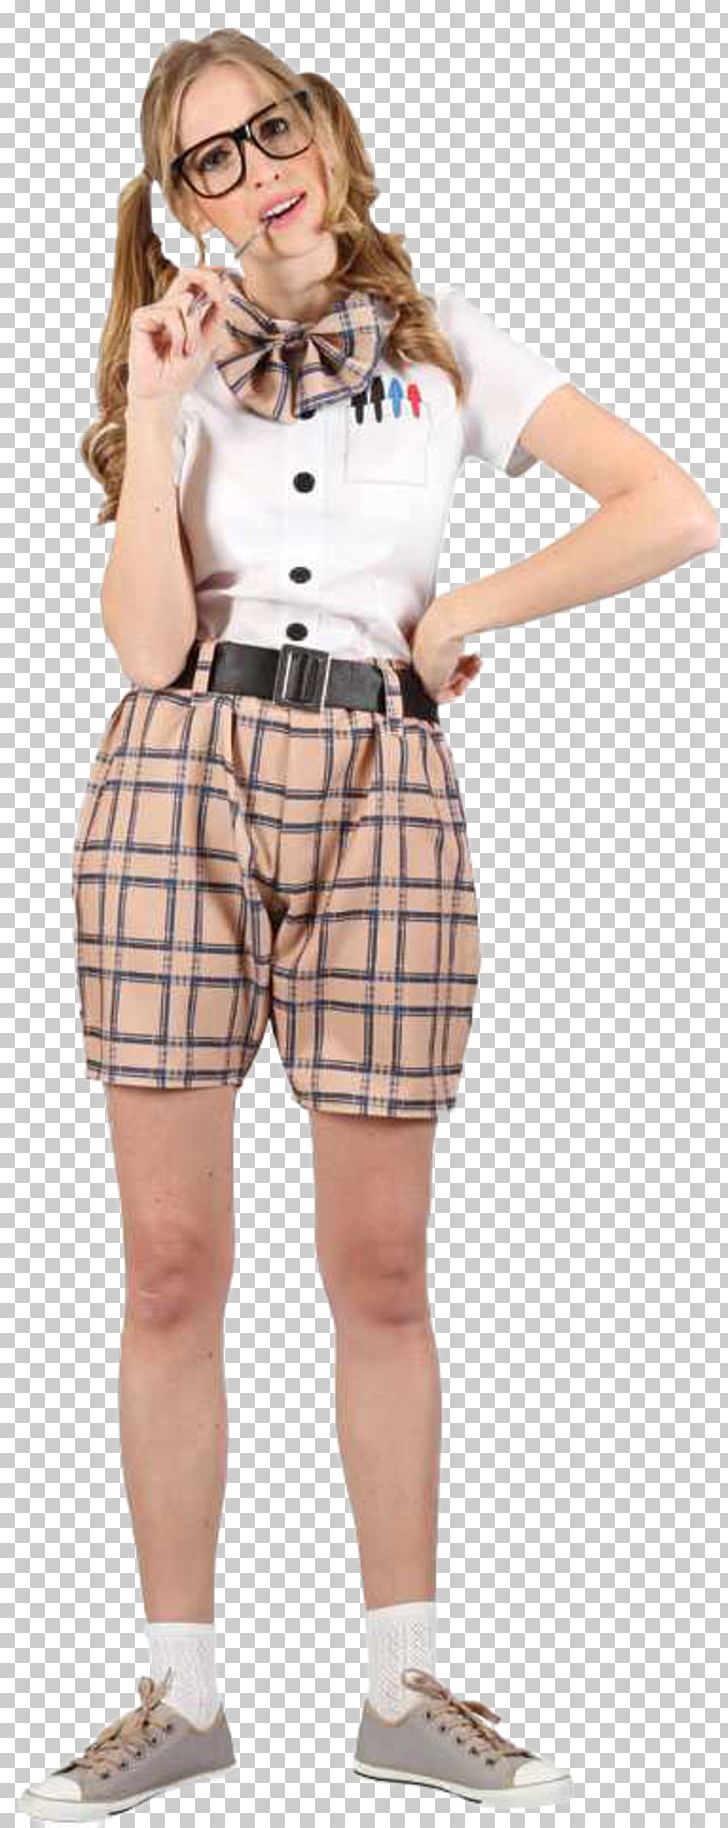 Nerd Costume Party Geek National Secondary School PNG, Clipart, Abdomen, Adult, Bow Tie, Clothing, Clothing Accessories Free PNG Download